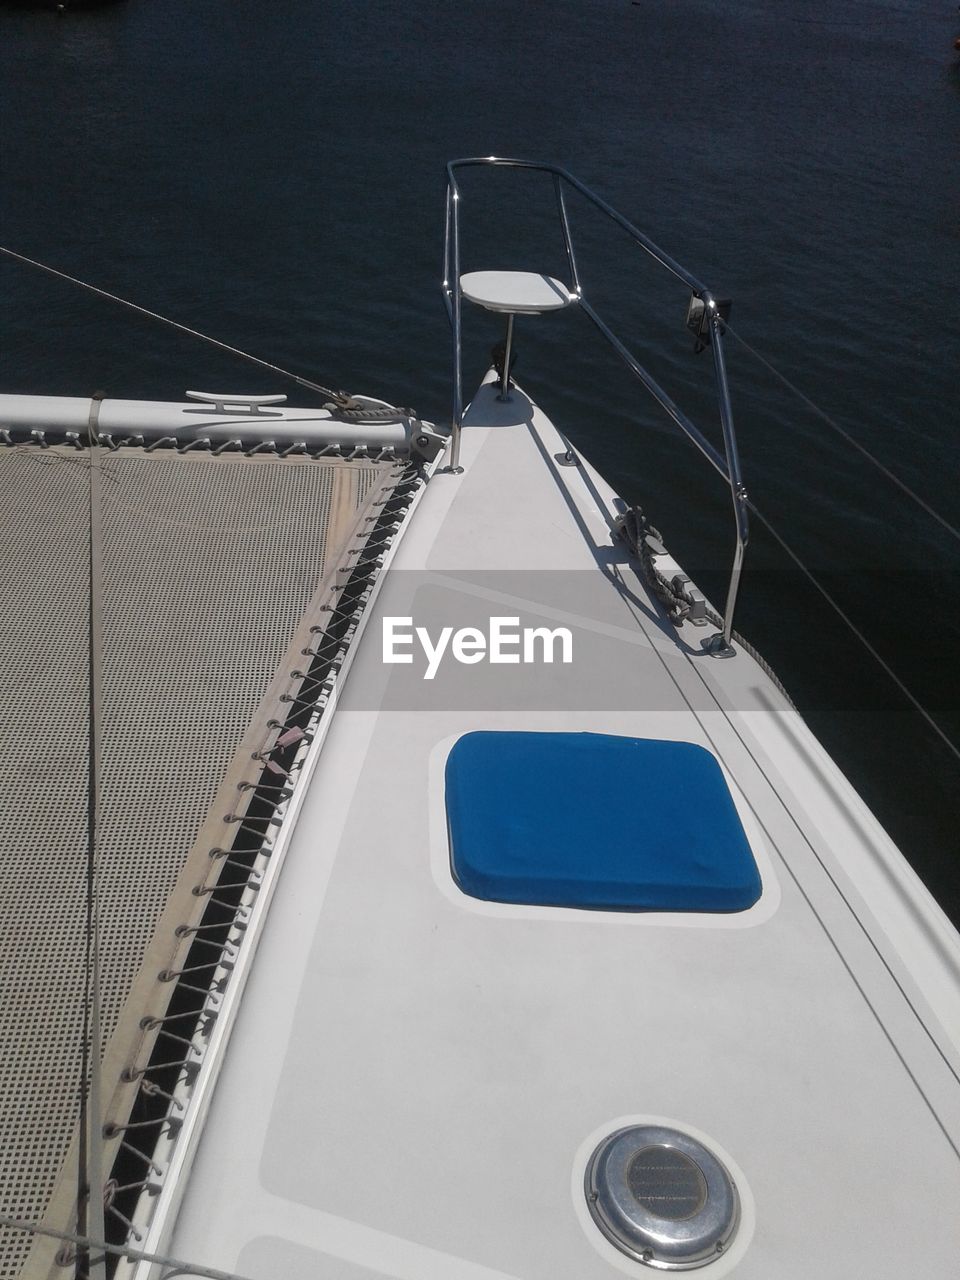 HIGH ANGLE VIEW OF NAUTICAL VESSEL MOORED IN SEA